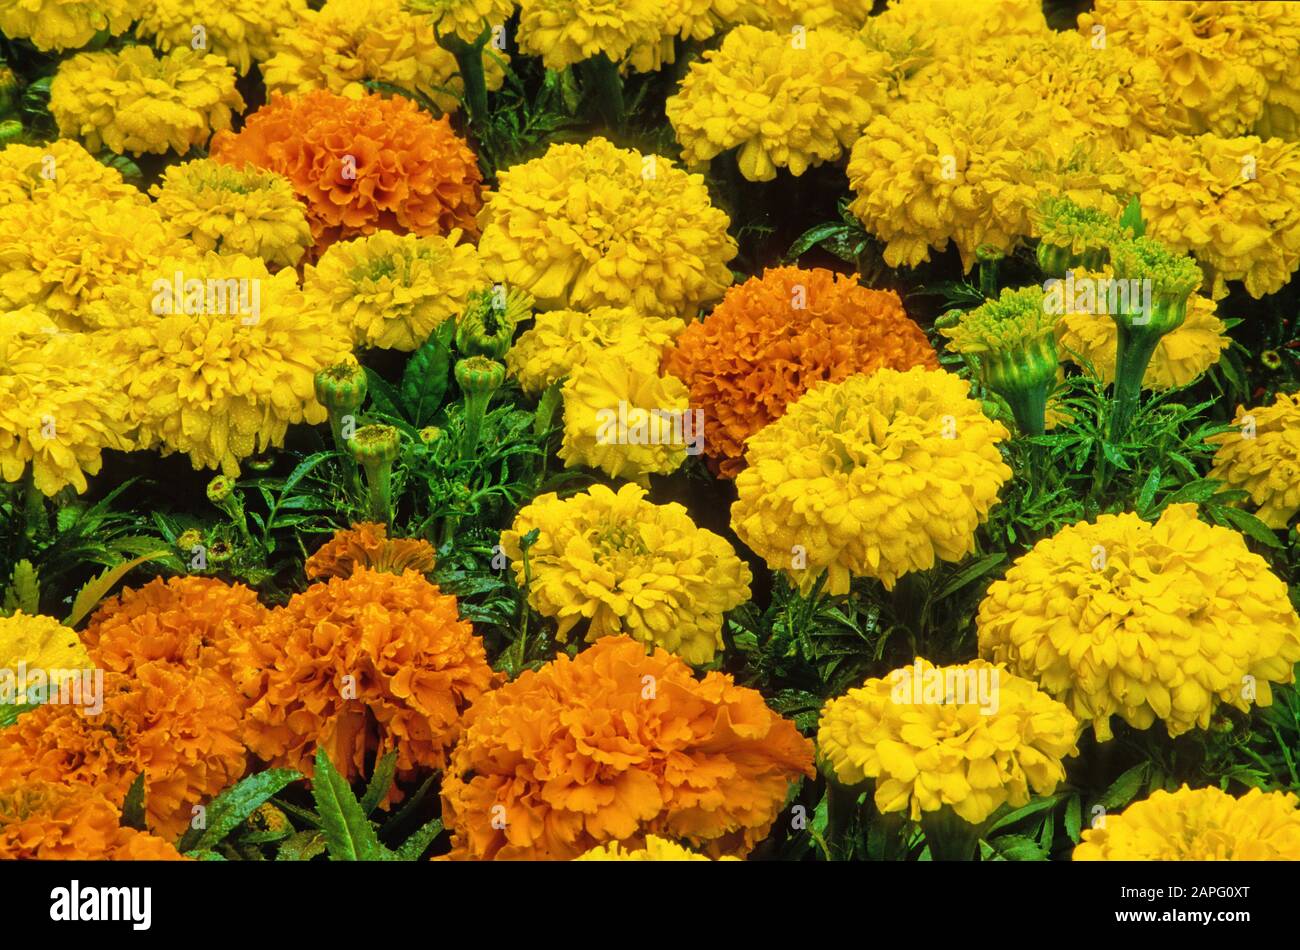 Mexican Marigold (Tagetes erecta) flowers Stock Photo